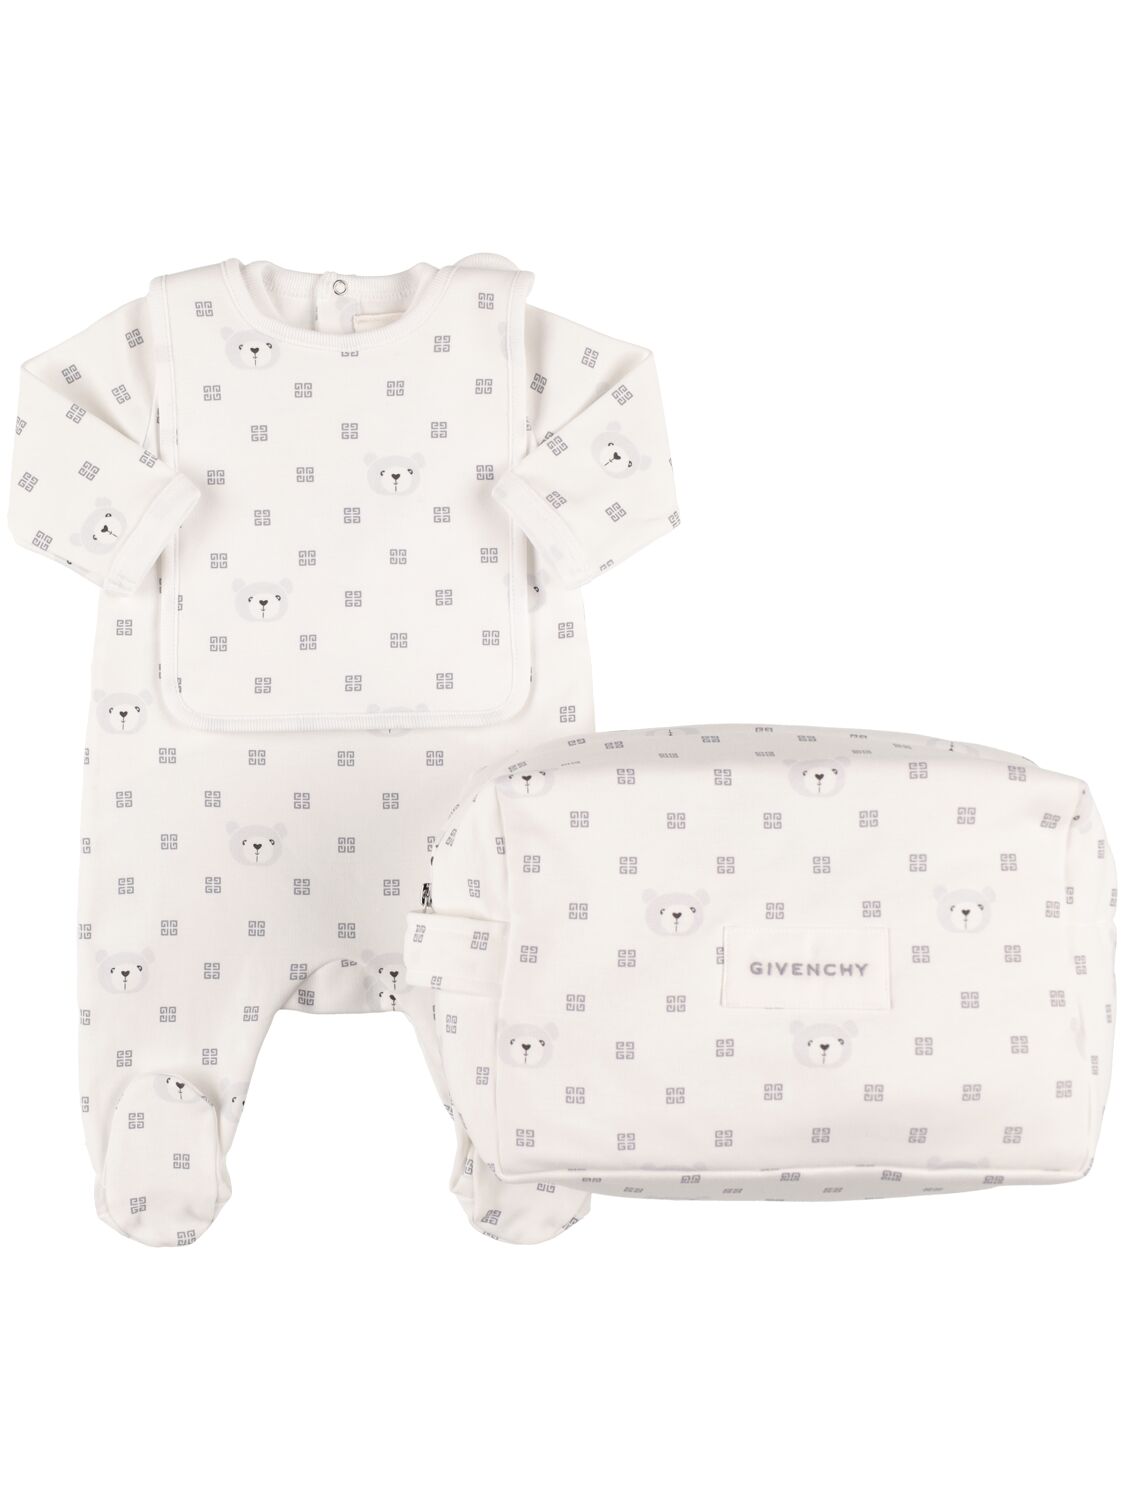 Givenchy Kids' Cotton Jersey Romper, Bib & Pouch In White